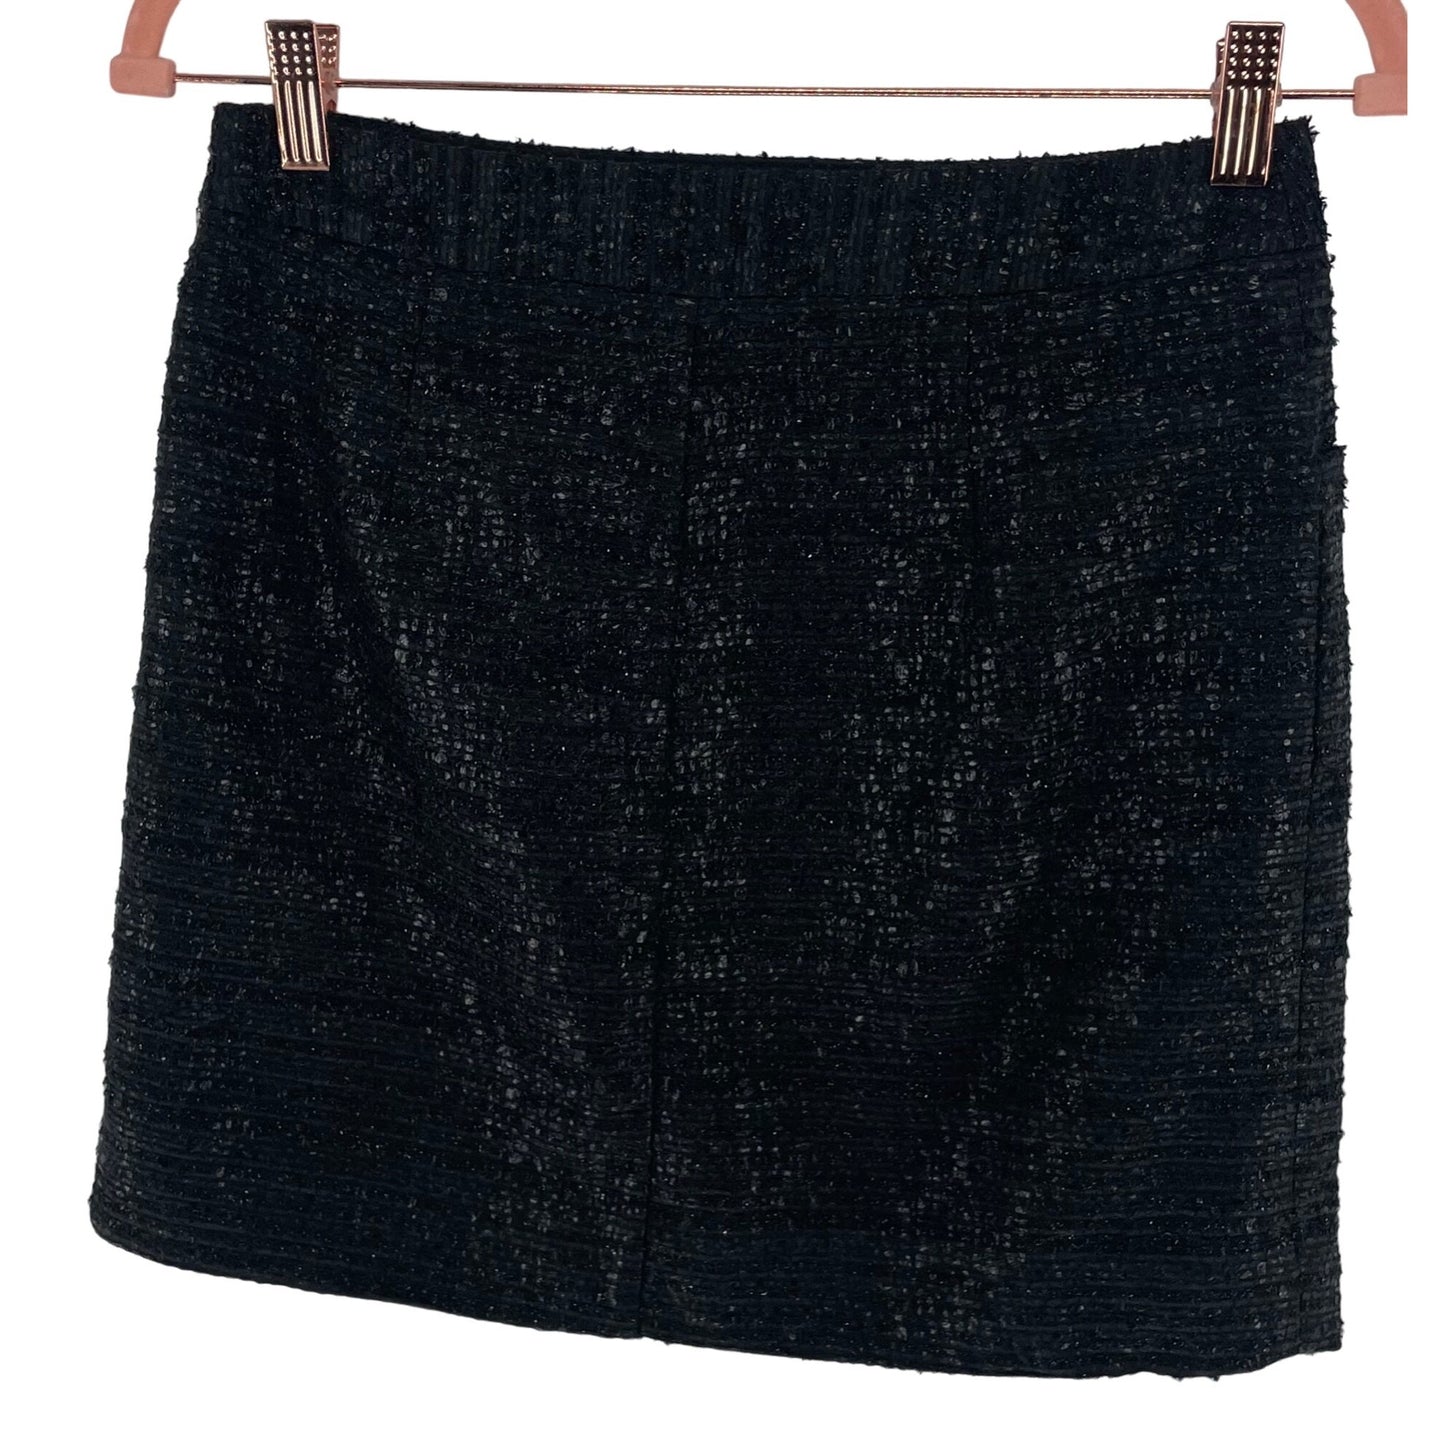 The Limited Women's Size 0 Black Sparkly Tweed Mink Skirt